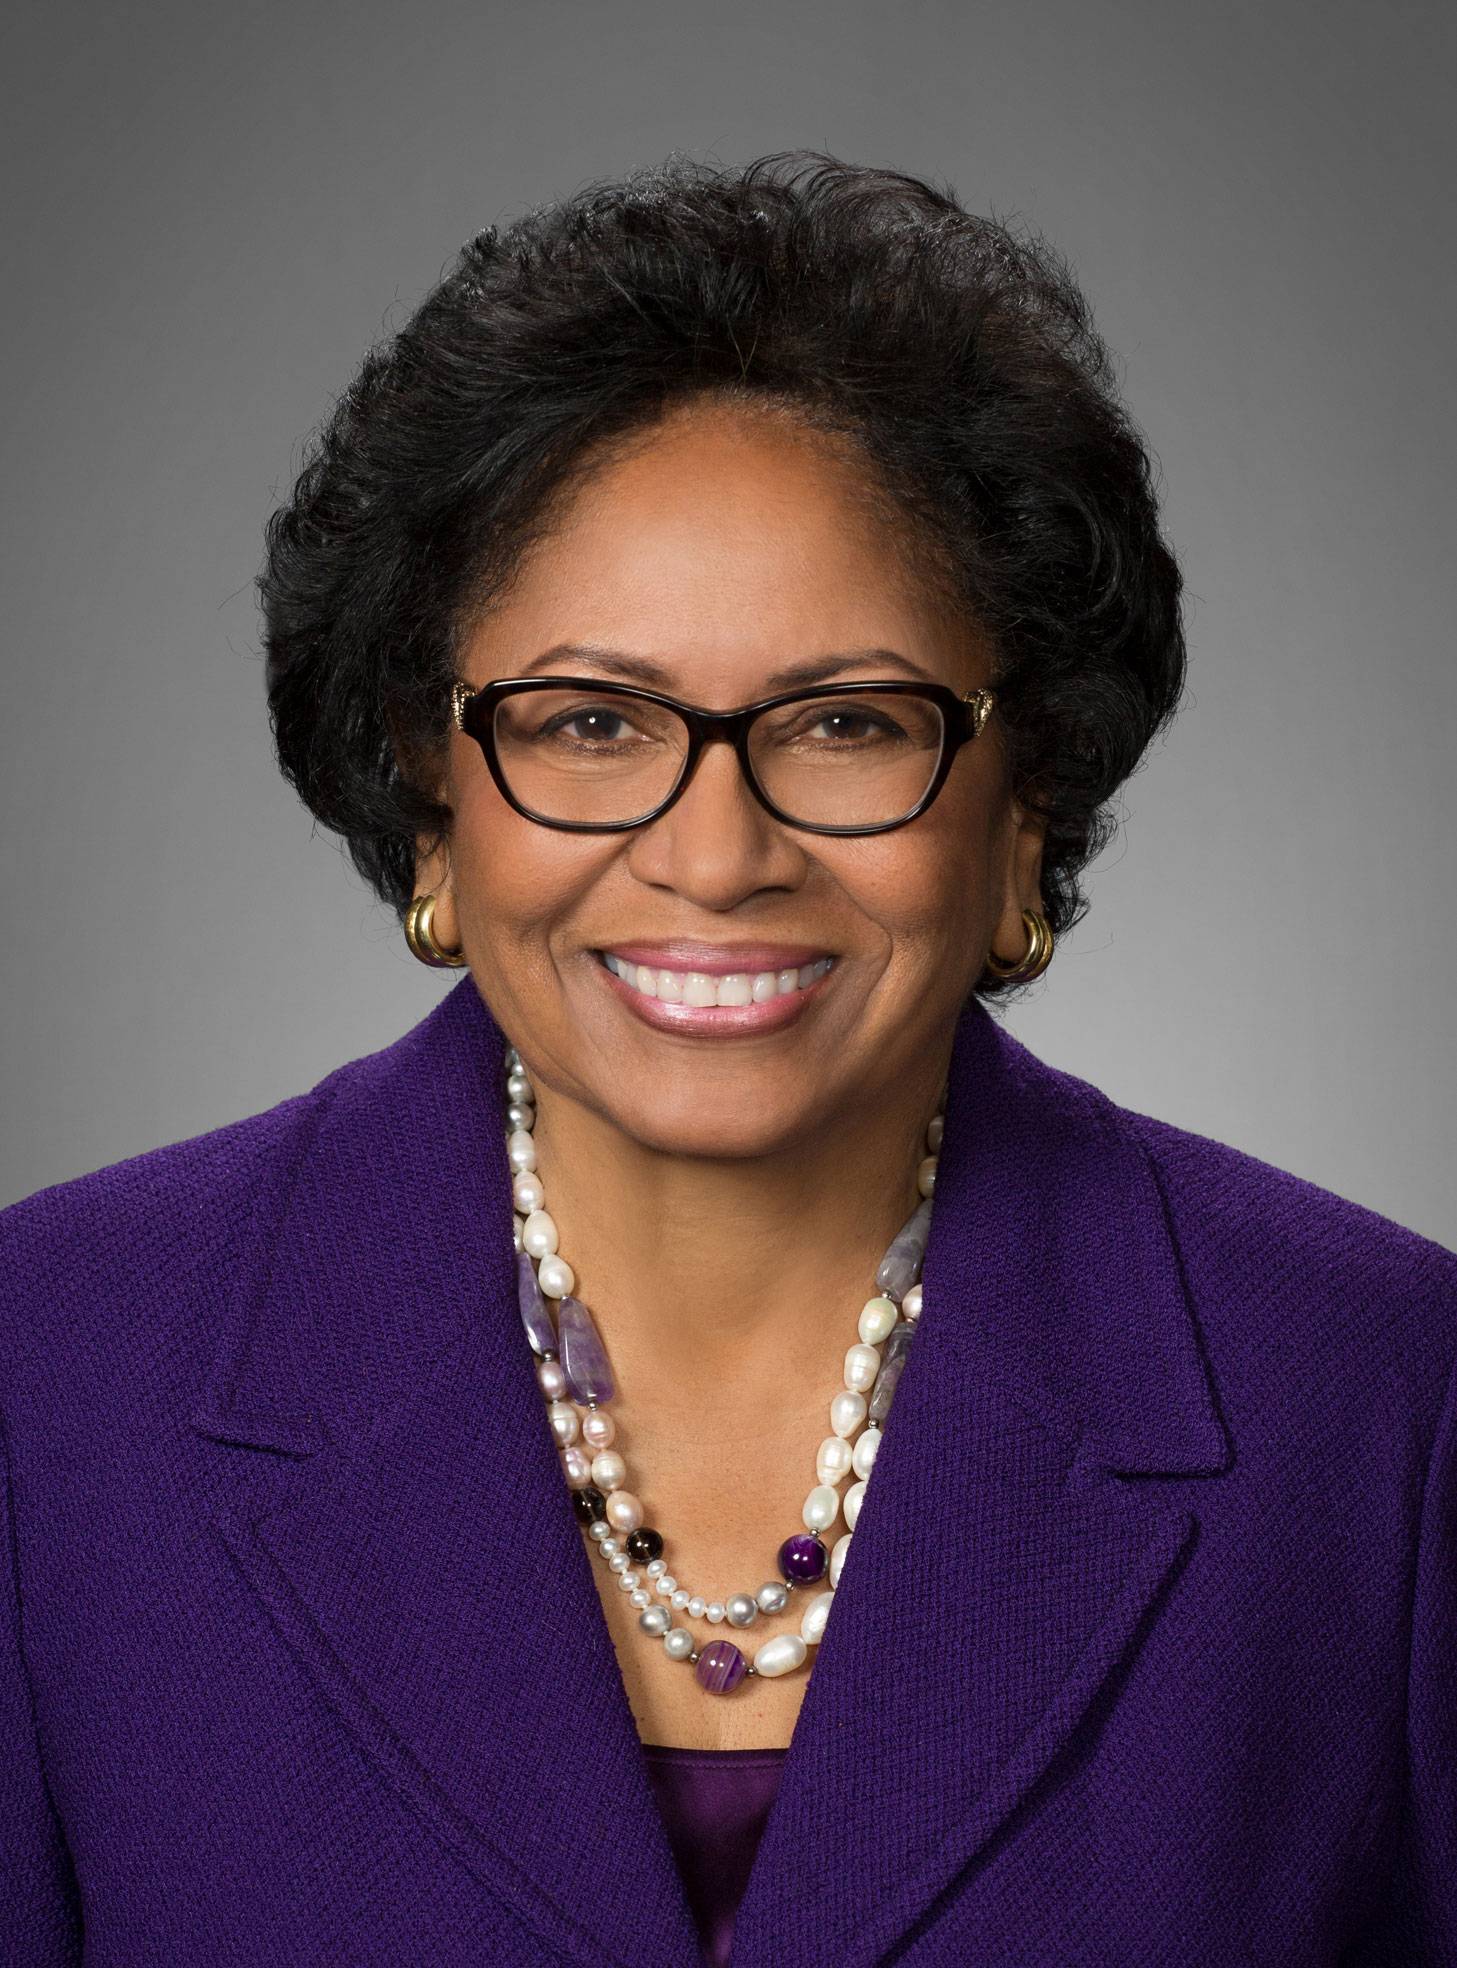 Ruth J. Simmons will speak at Princeton’s Baccalaureate ceremony